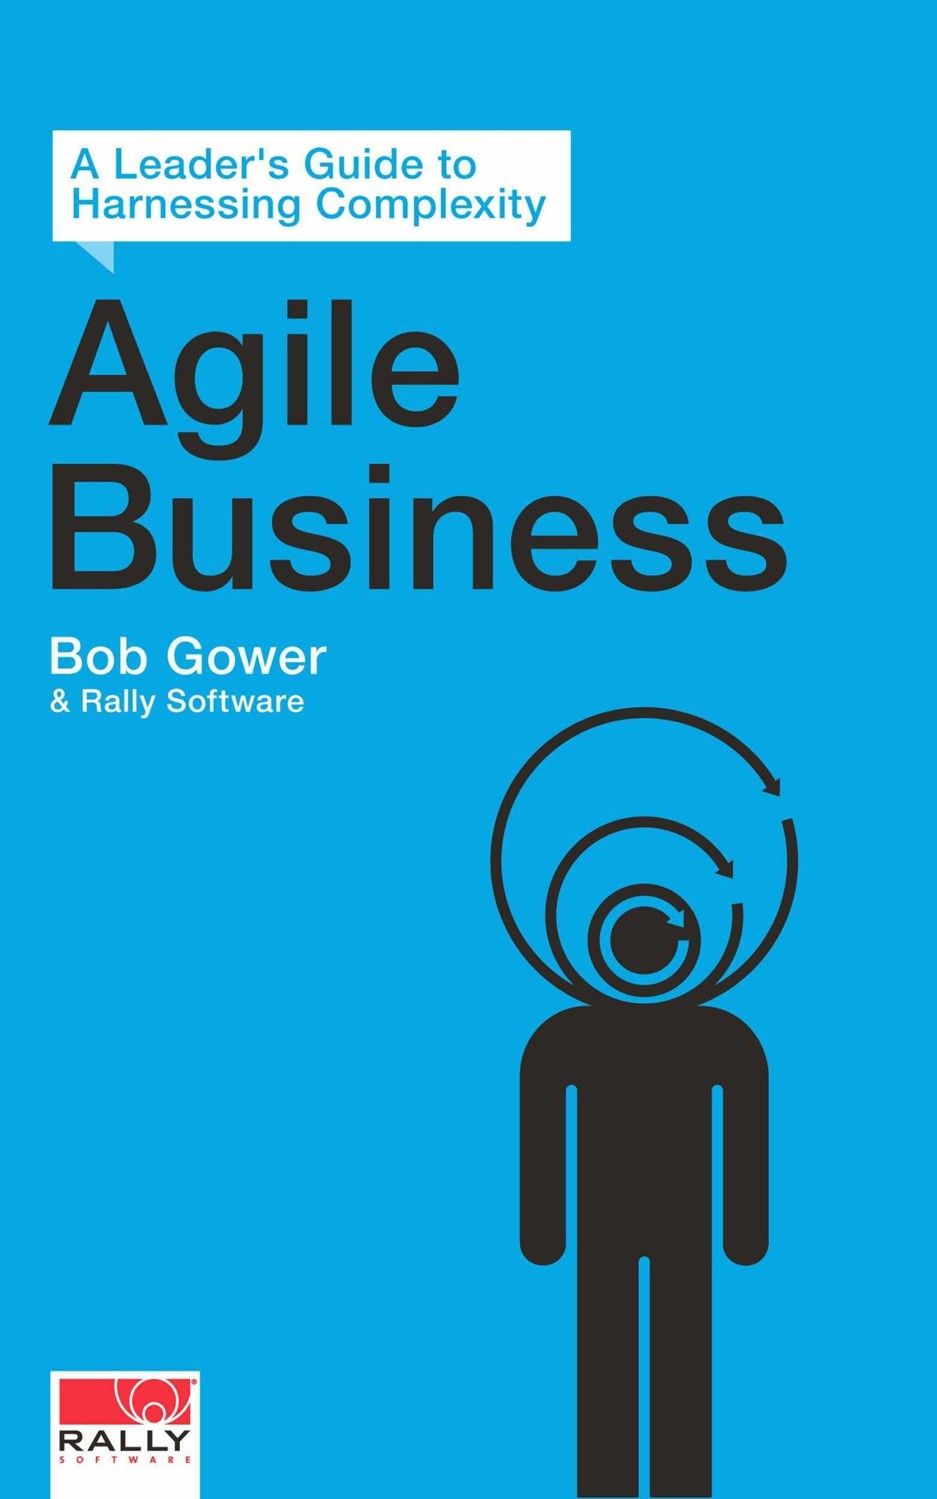 Agile Business: A Leader’s Guide to Harnessing Complexity